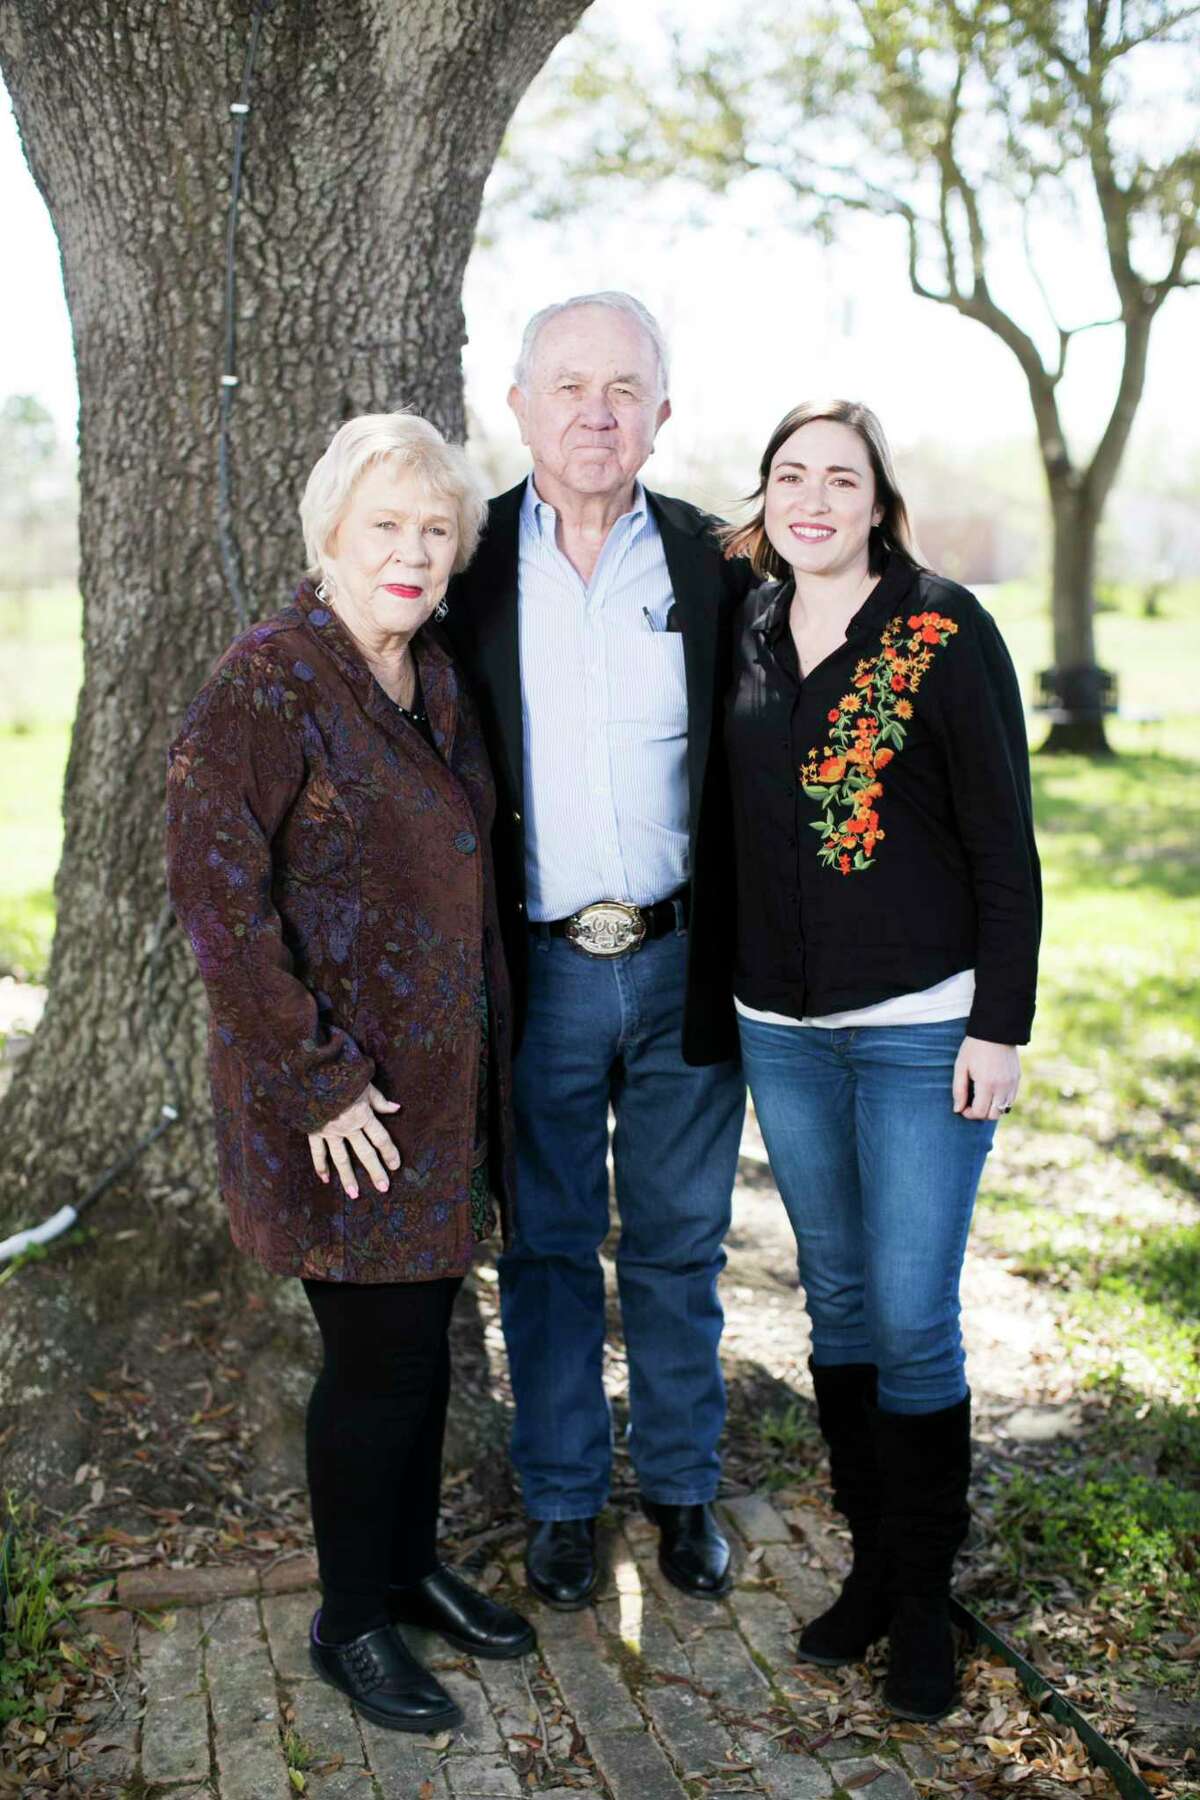 Haak Vineyards & Winery owners Gladys Haak, Raymond Haak and winemaker Tiffany Farrell. Haak Vineyards & Winery, founded in 2000 is an award winning, family-owned winery located in Santa Fe, Texas. Wednesday, March 6, 2019, in Santa Fe. The Haaks recently announced their retirement and have sold most of the Haak Vineyards and Winery. See Ron Saikowski’s column on Aug. 7 for more on the transition.